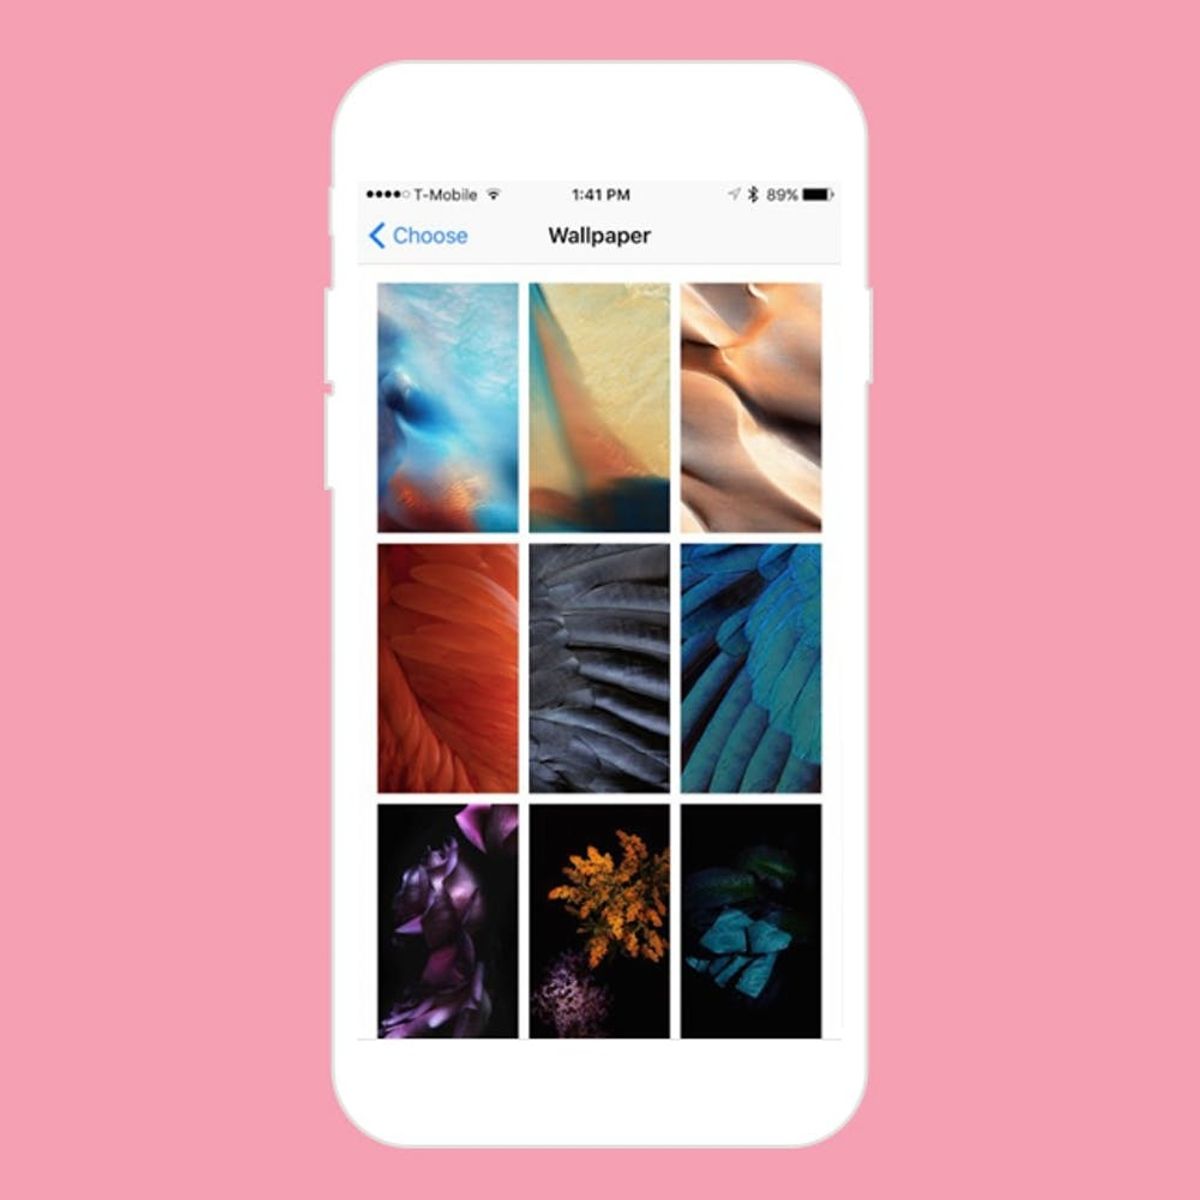 15 Gorg New Wallpapers on the New iOS 9 Update